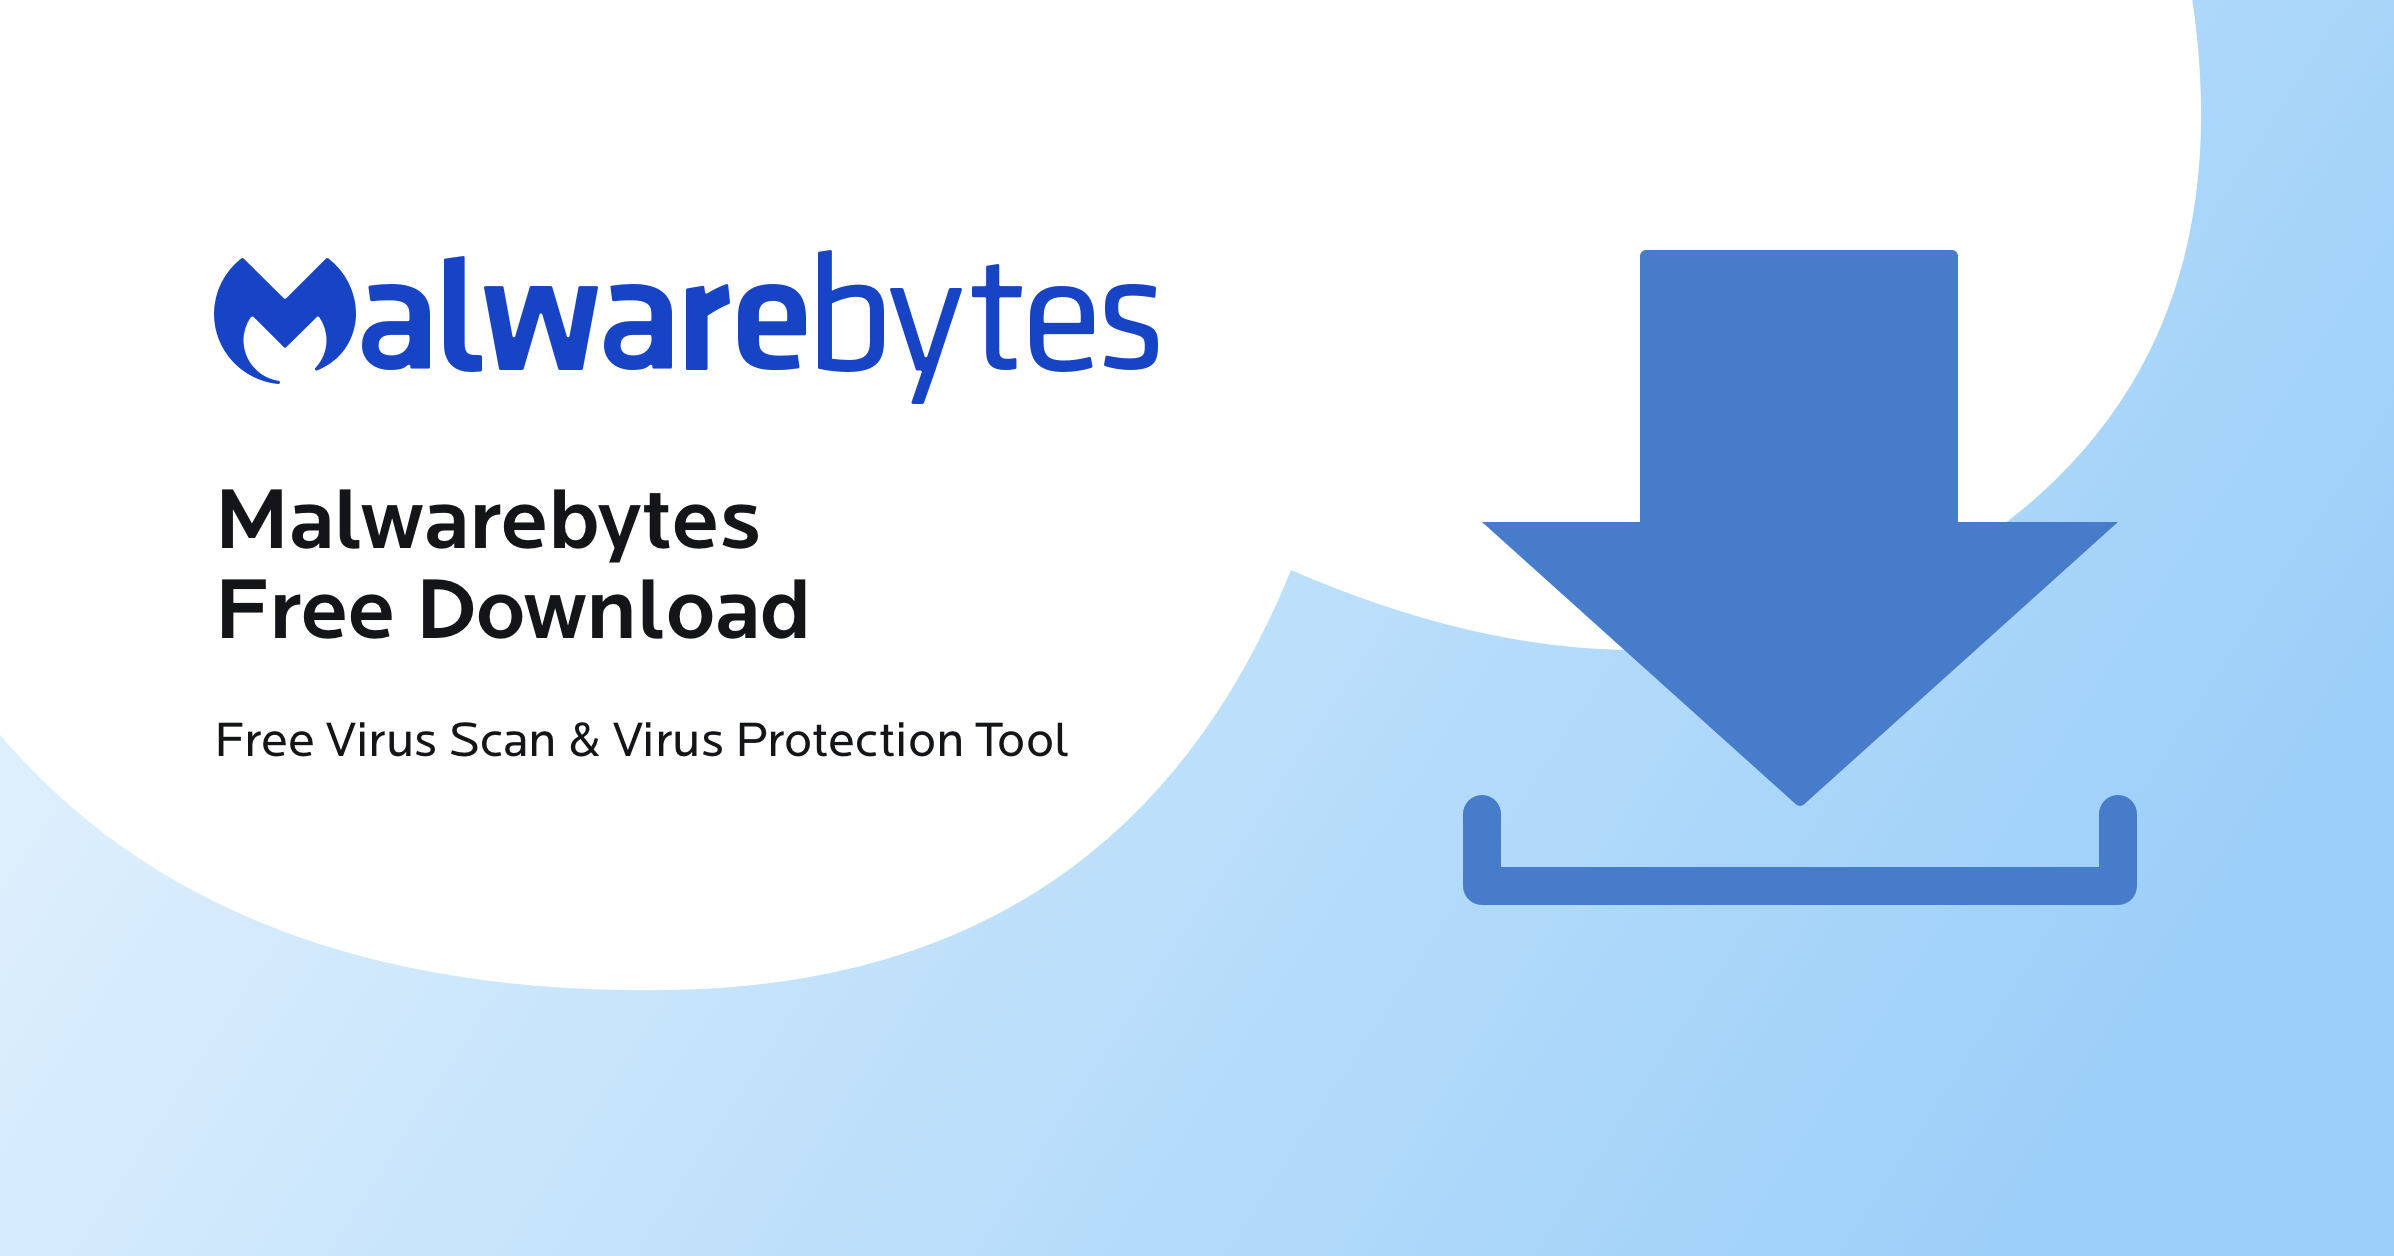 Download a reputable anti-malware tool such as Malwarebytes.
Install the software on your computer.